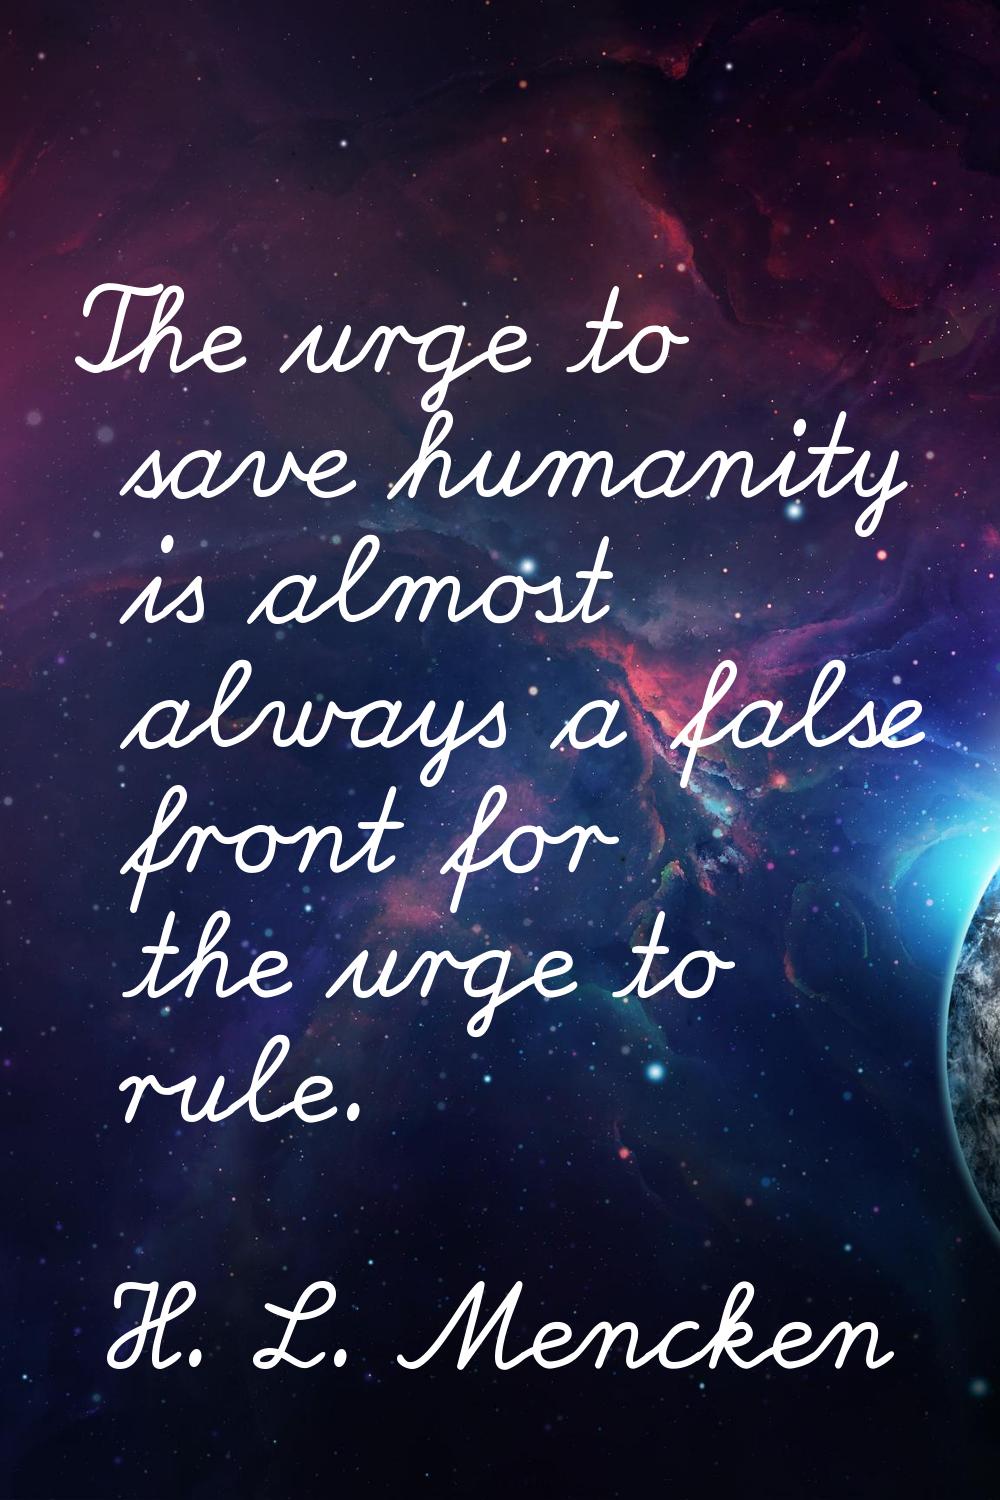 The urge to save humanity is almost always a false front for the urge to rule.